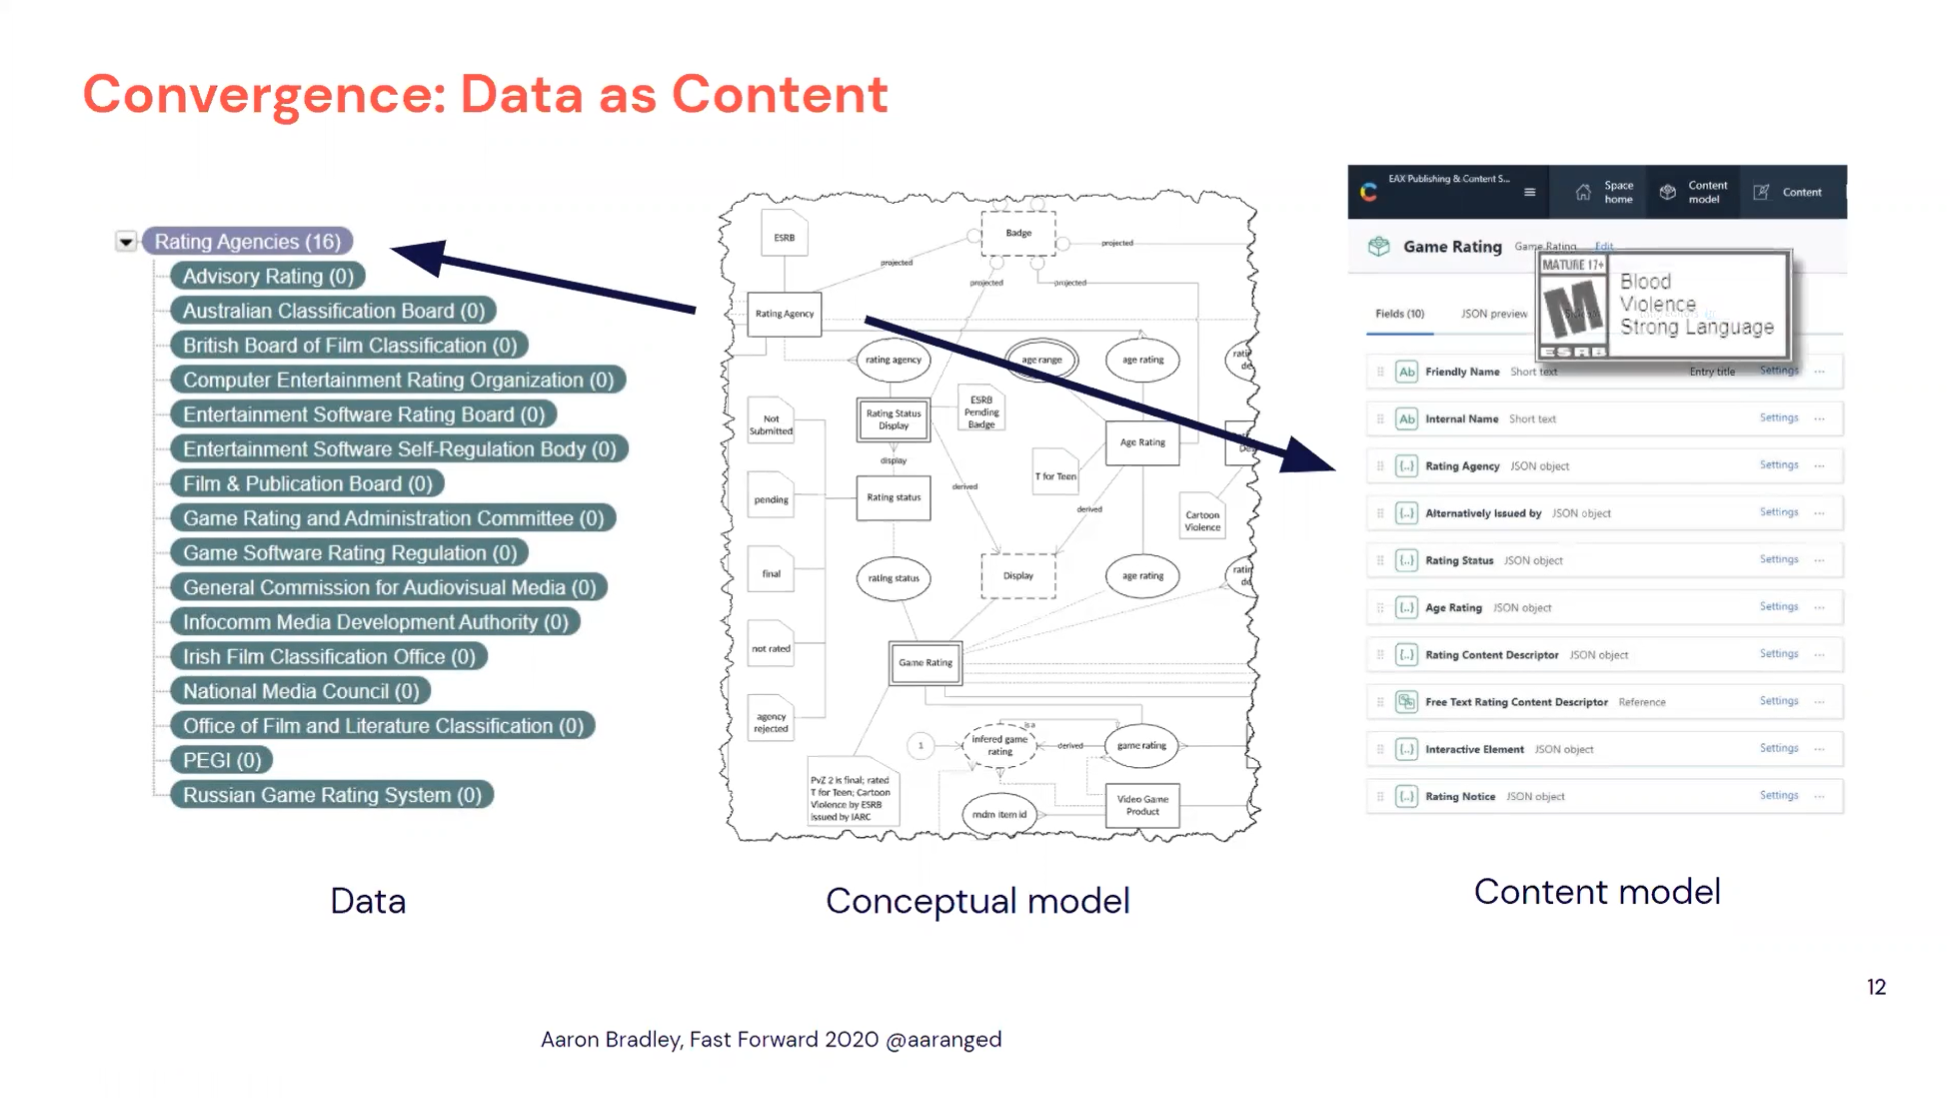 Screenshot and breakdown of the conceptual model of EA's content promotions